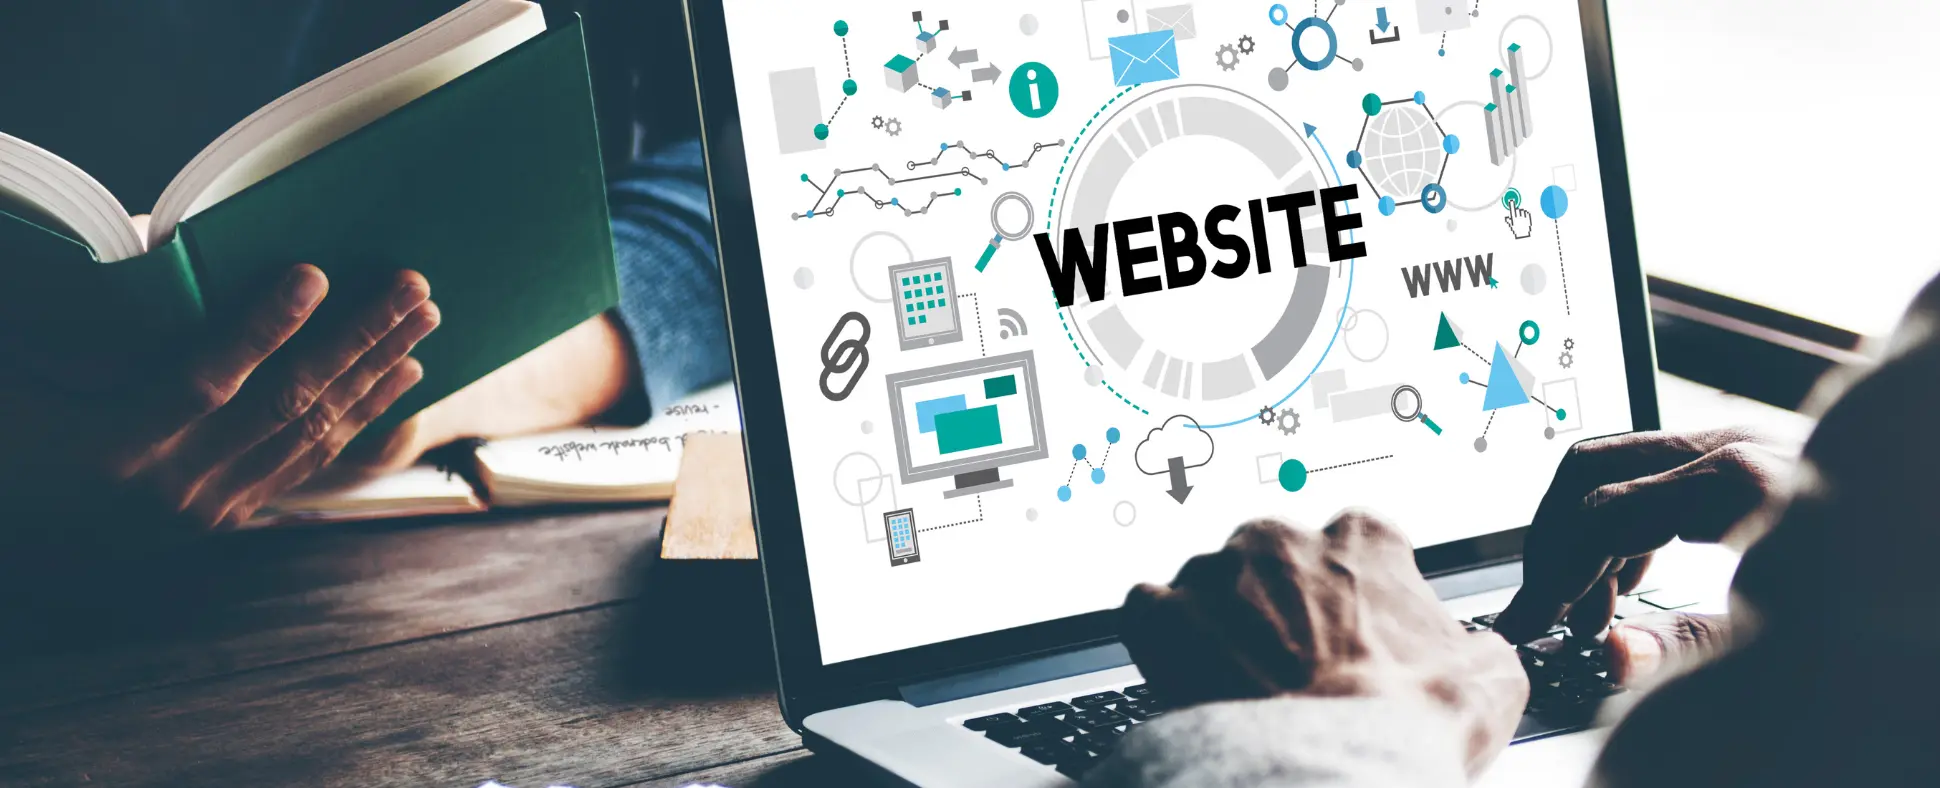 Get Your Website Right From The Start